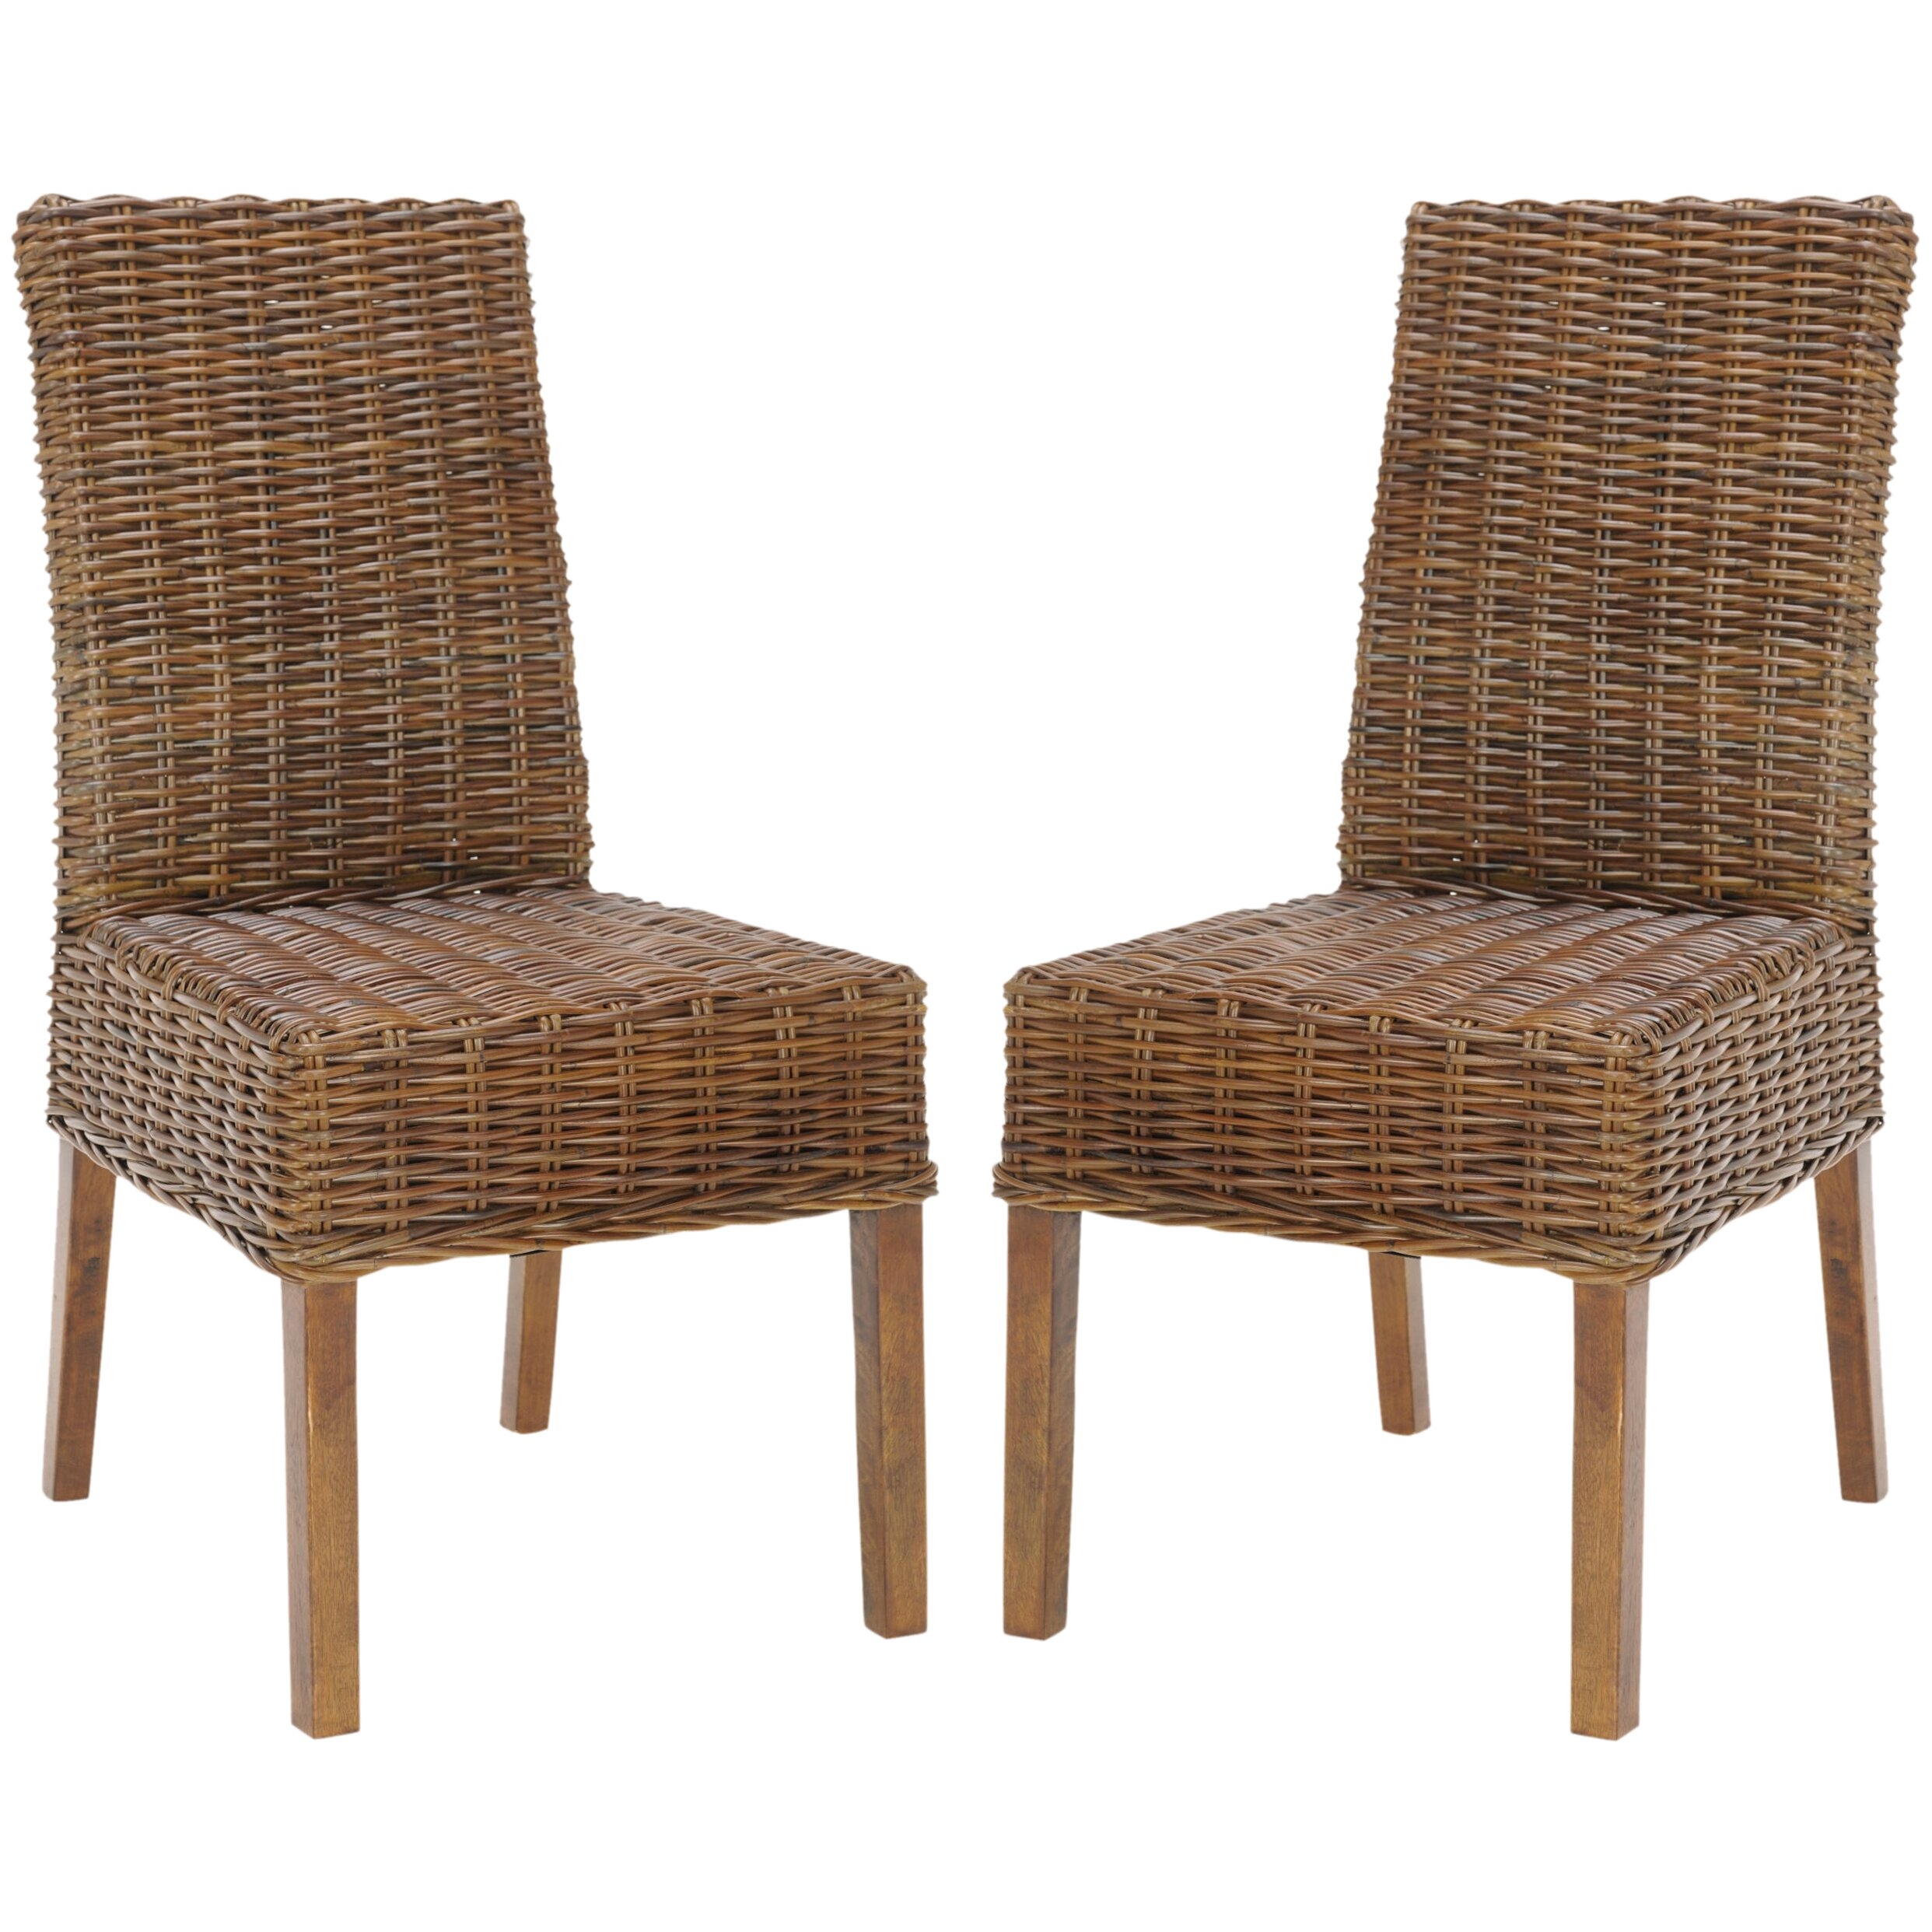 Wicker Indoor Dining Chairs - Ideas on Foter